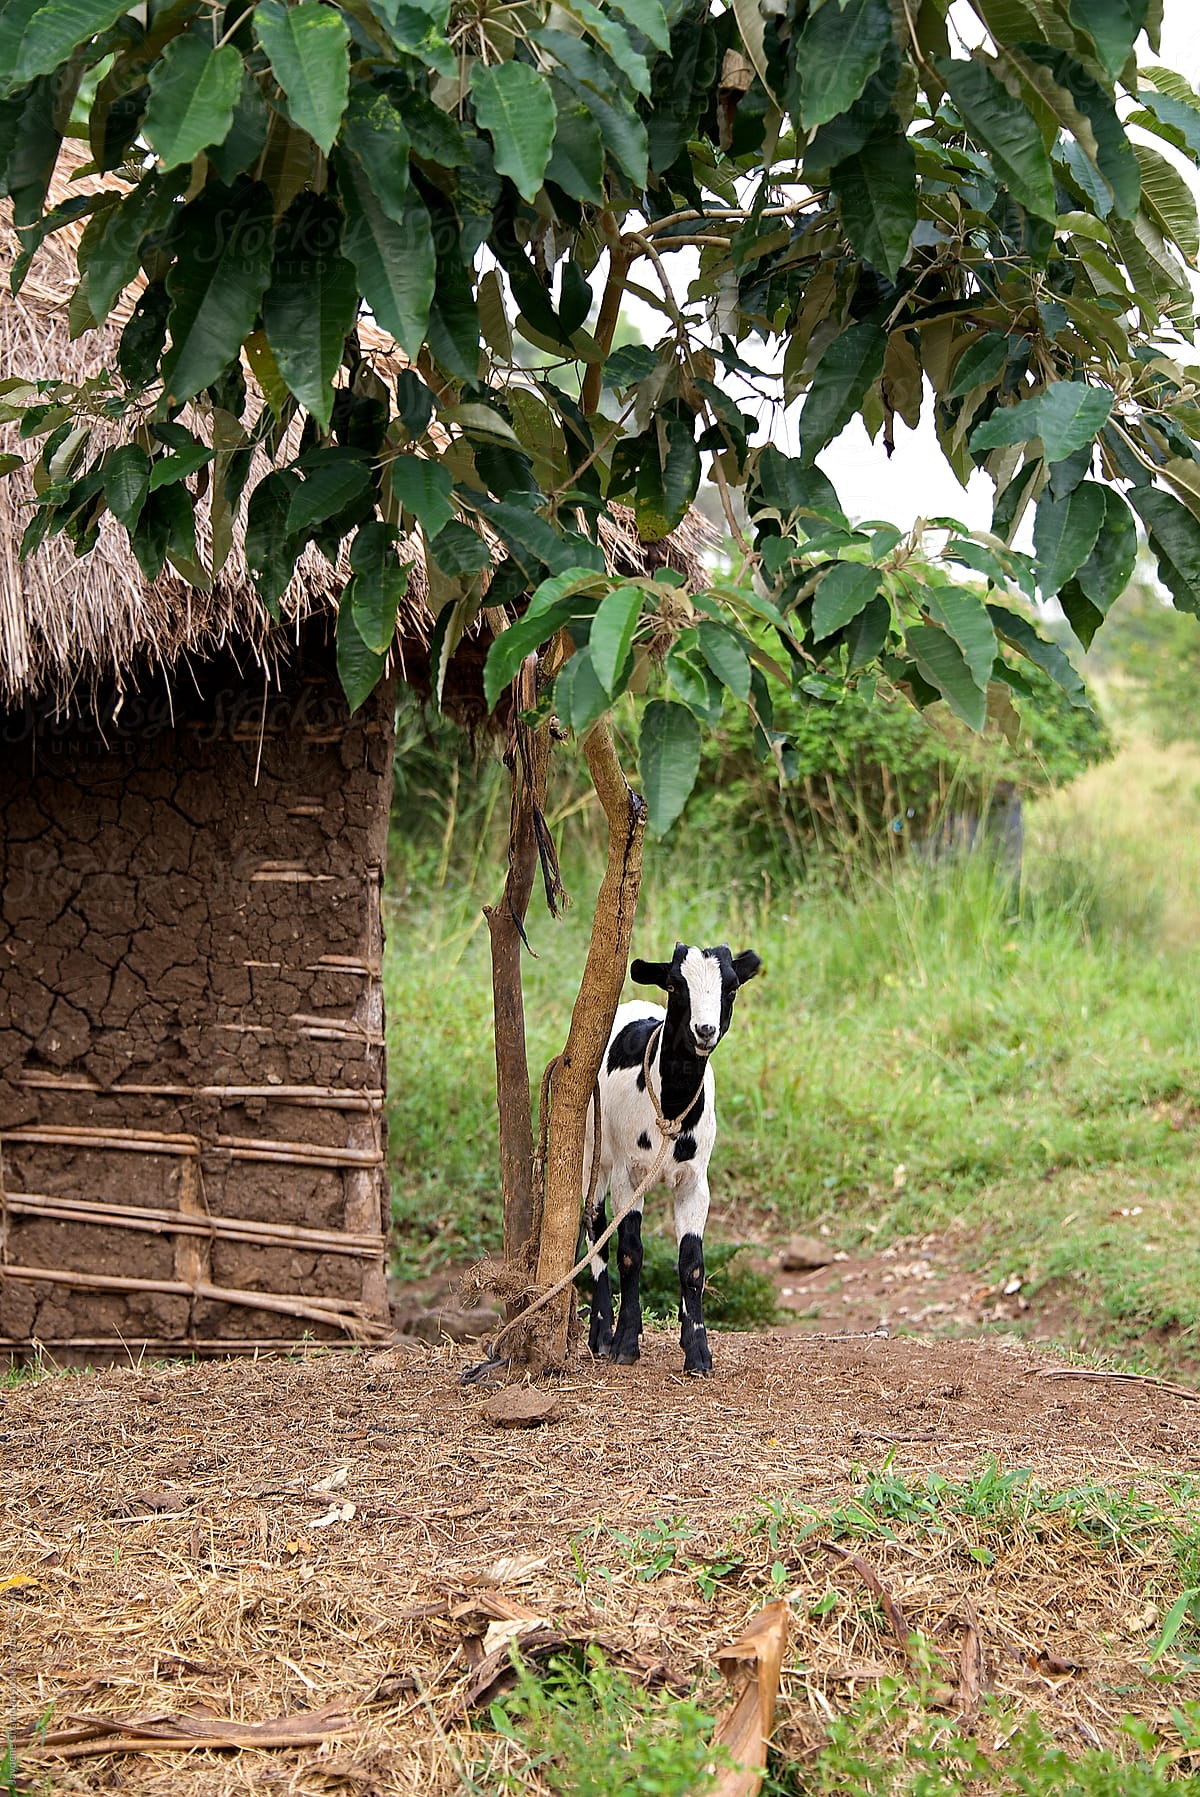 Back and white goat tied to a tree in a small village, Uganda, Africa